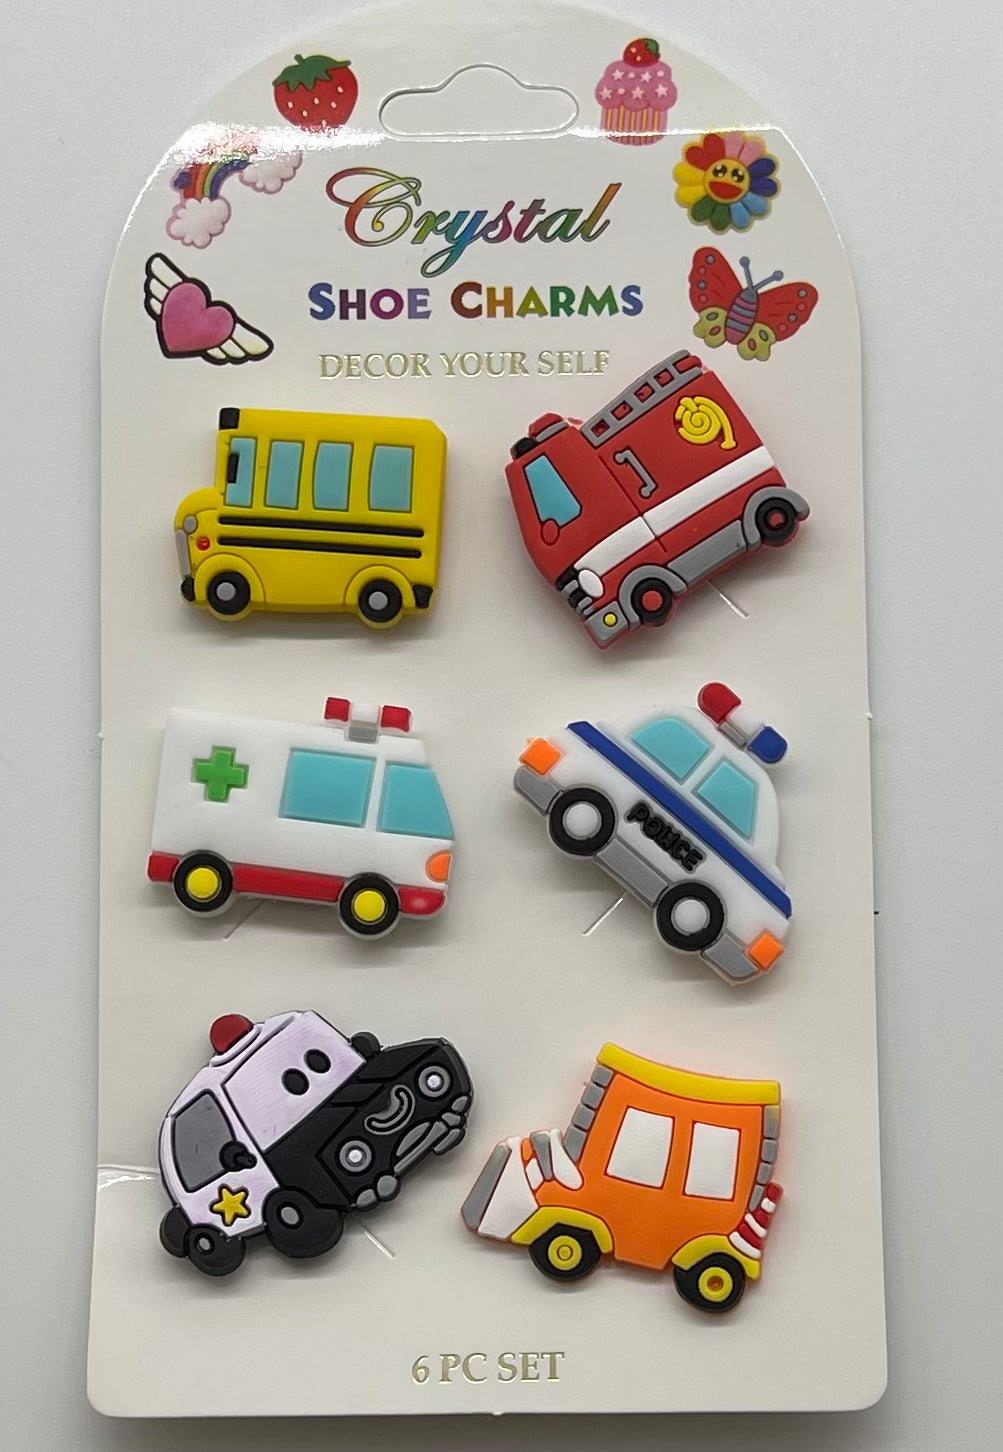 Charms Sets for crocodile shoes & Charlie's key charms – DuEvol Boutique